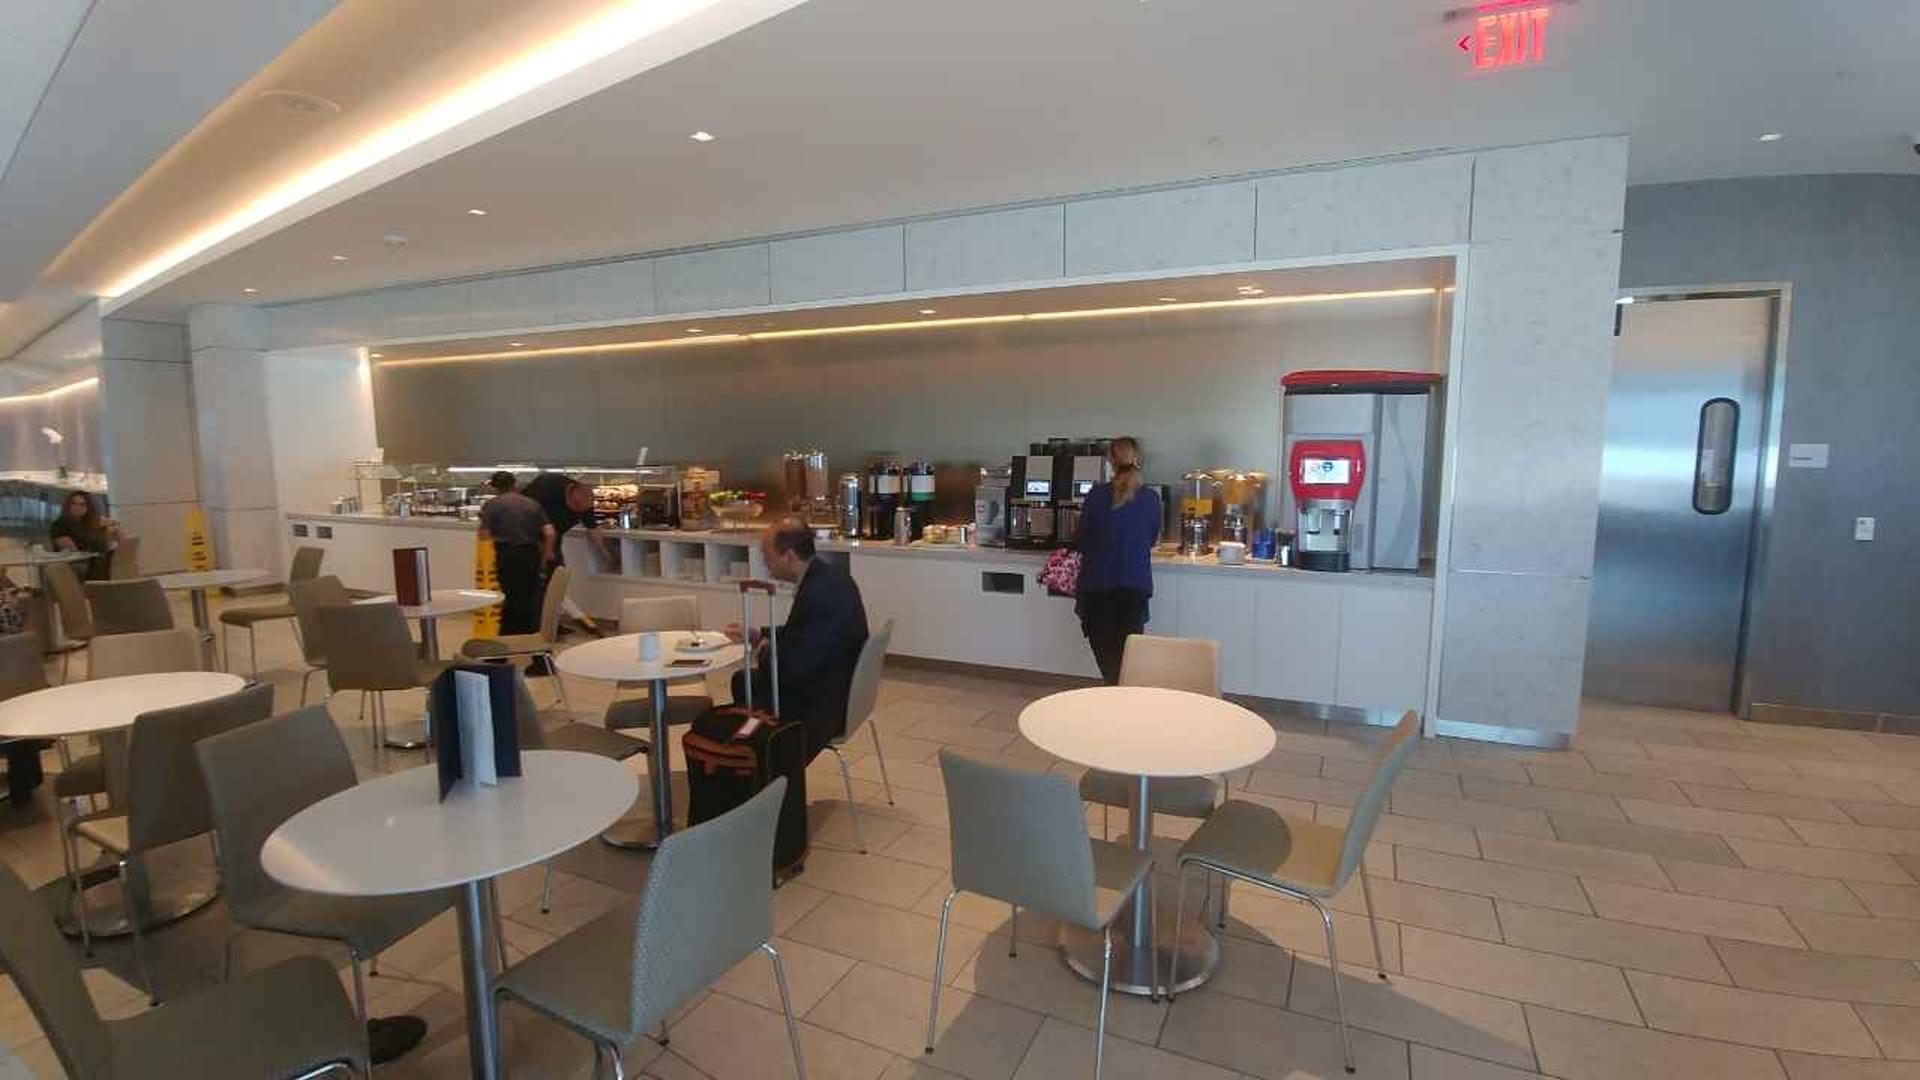 United Airlines United Club image 6 of 7